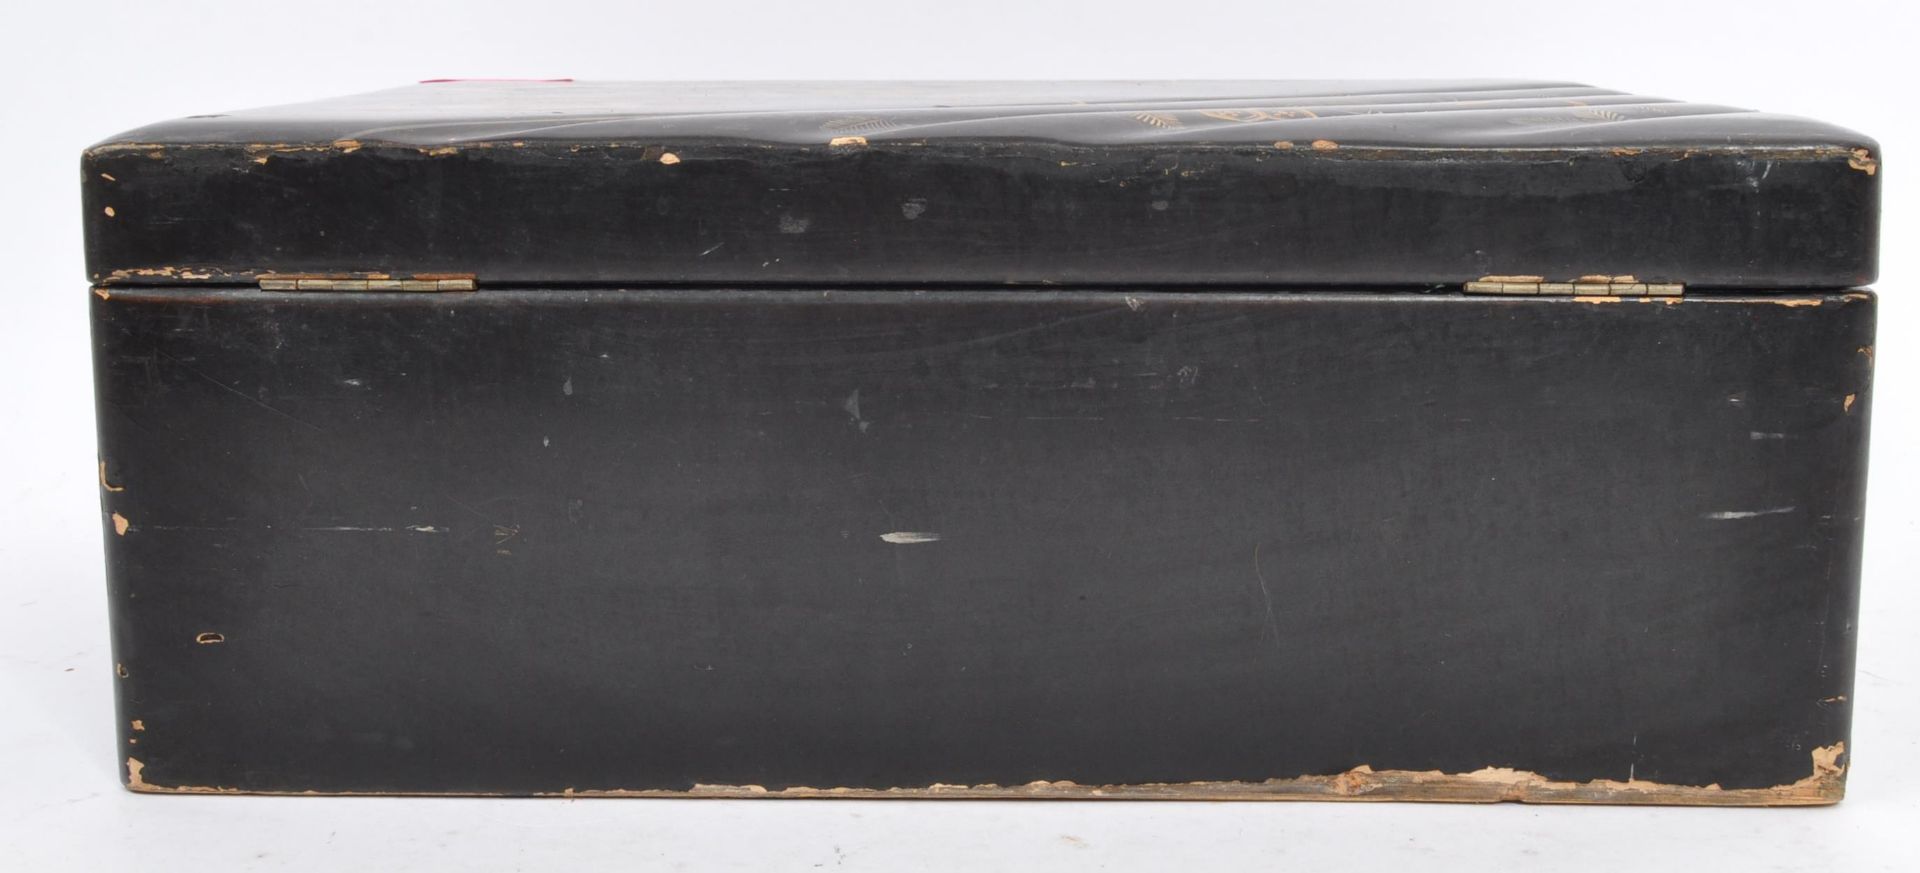 EARLY 20TH CENTURY JAPANESE GILT LACQUERED JEWELLERY BOX - Image 3 of 4